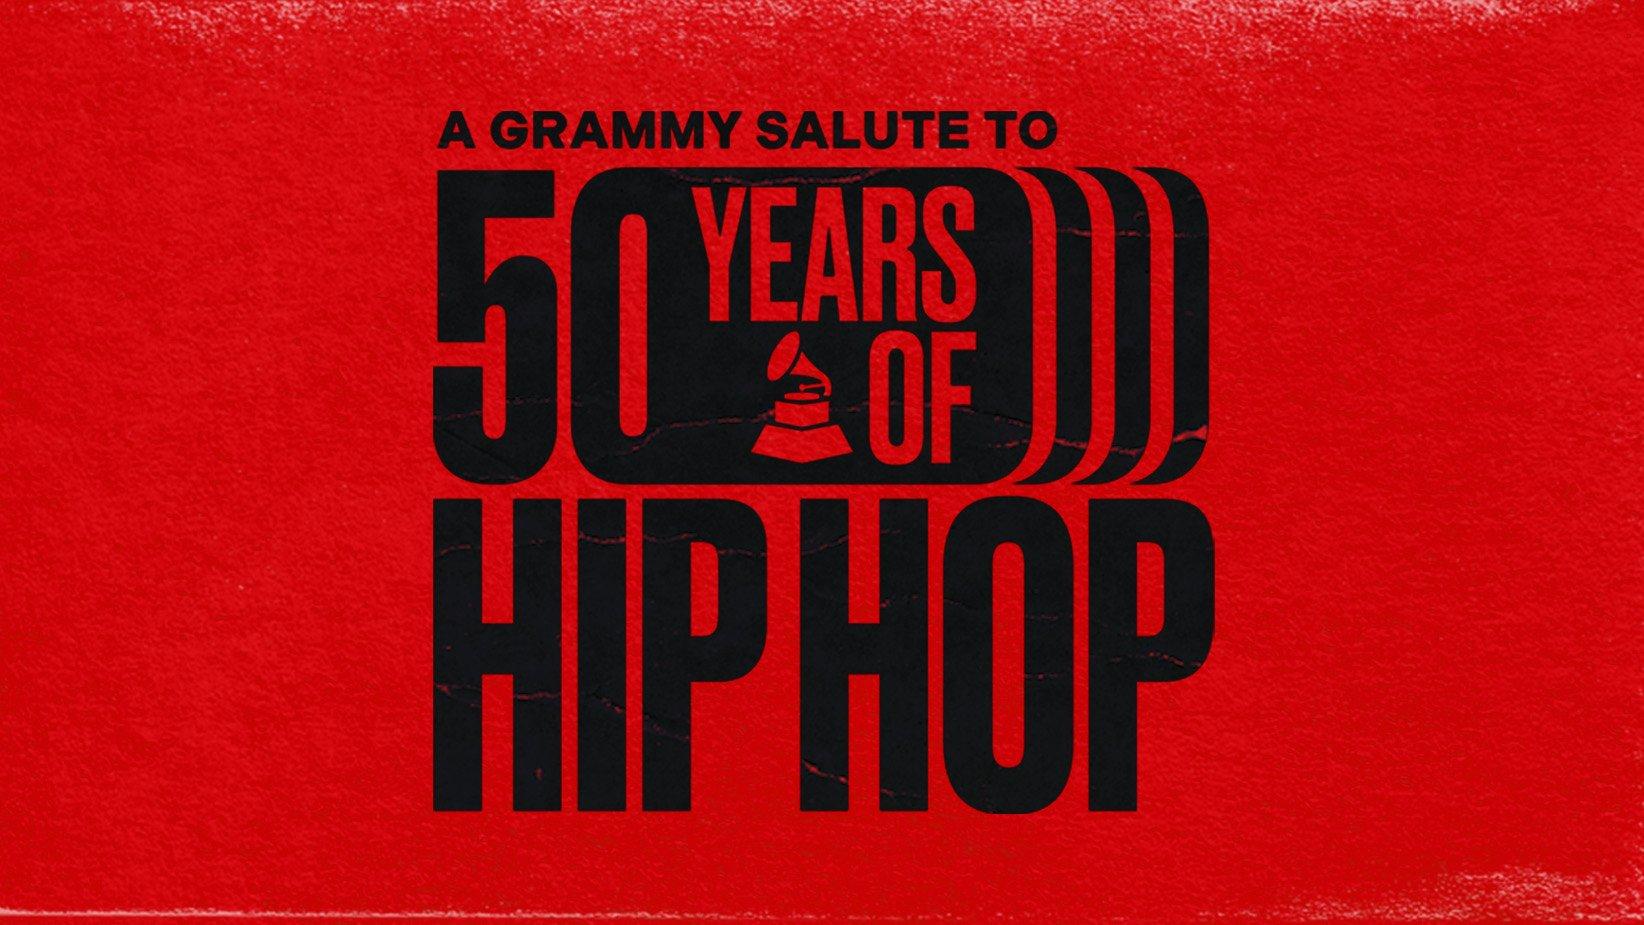 Graphic promoting the "A GRAMMY Salute to 50 Years of Hip-Hop" TV special, airing Sunday, Dec. 10 and presented by the Recording Academy, Jesse Collins Entertainment and CBS